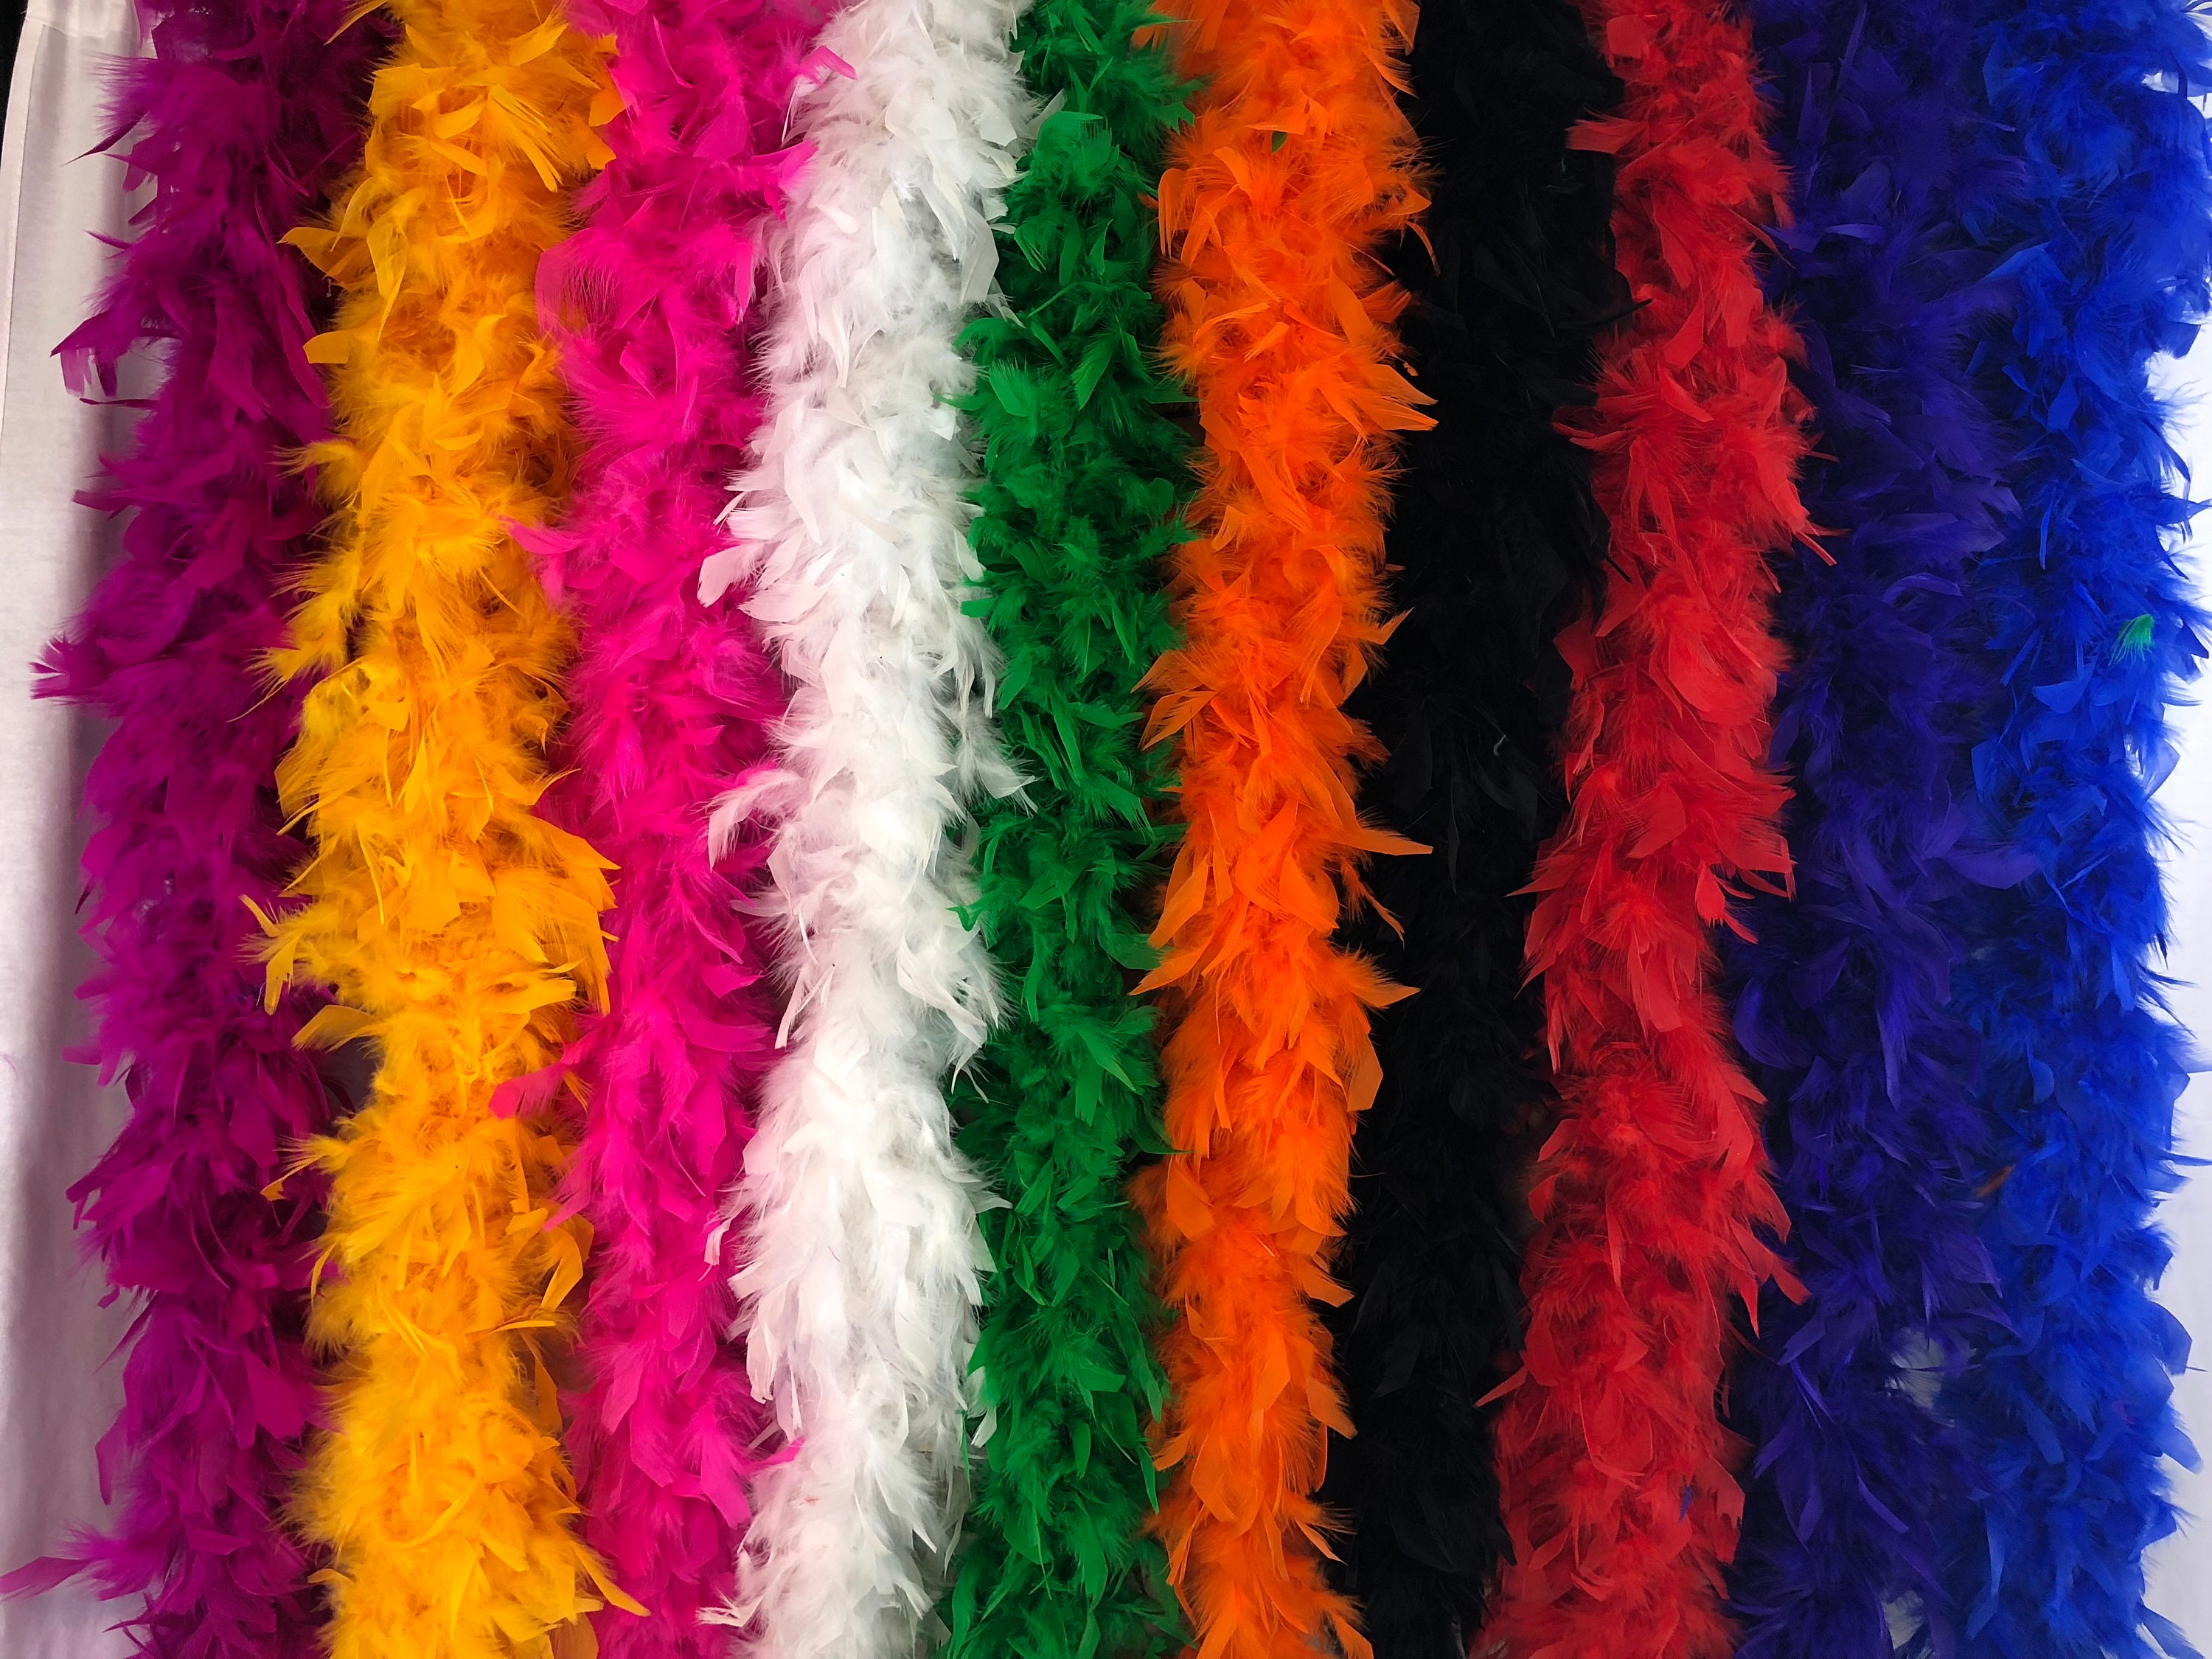  Colored Feather Boas for Party Bulk 9 Pcs Boas and 9